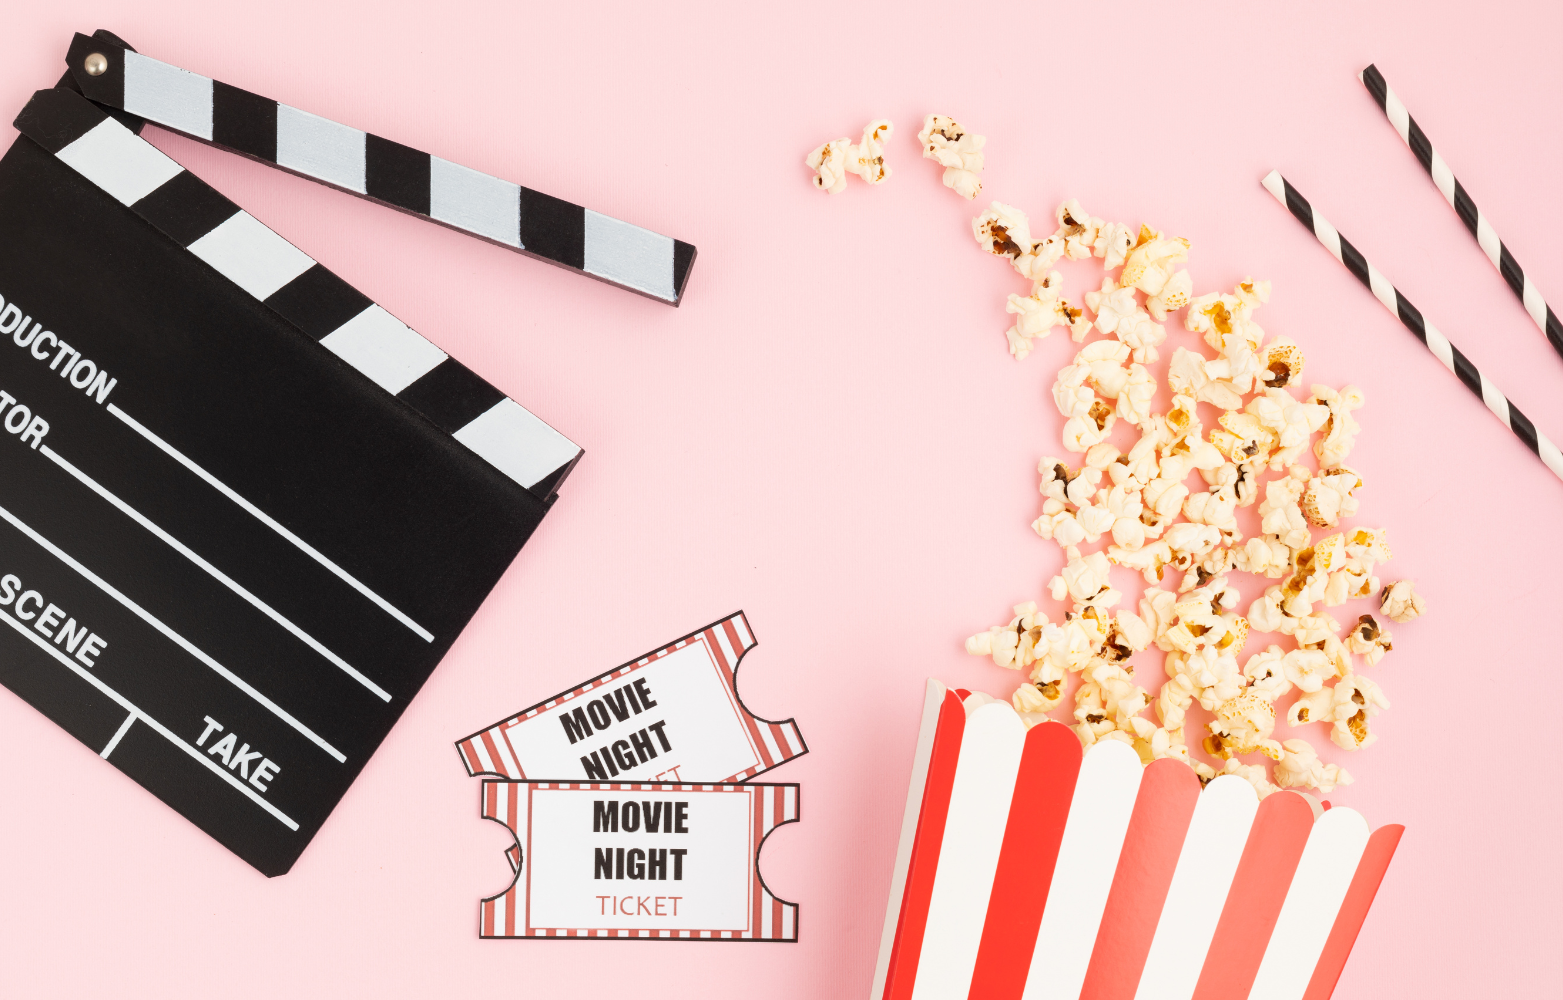 popcorn movie tickets straws and directors cut board on pink background